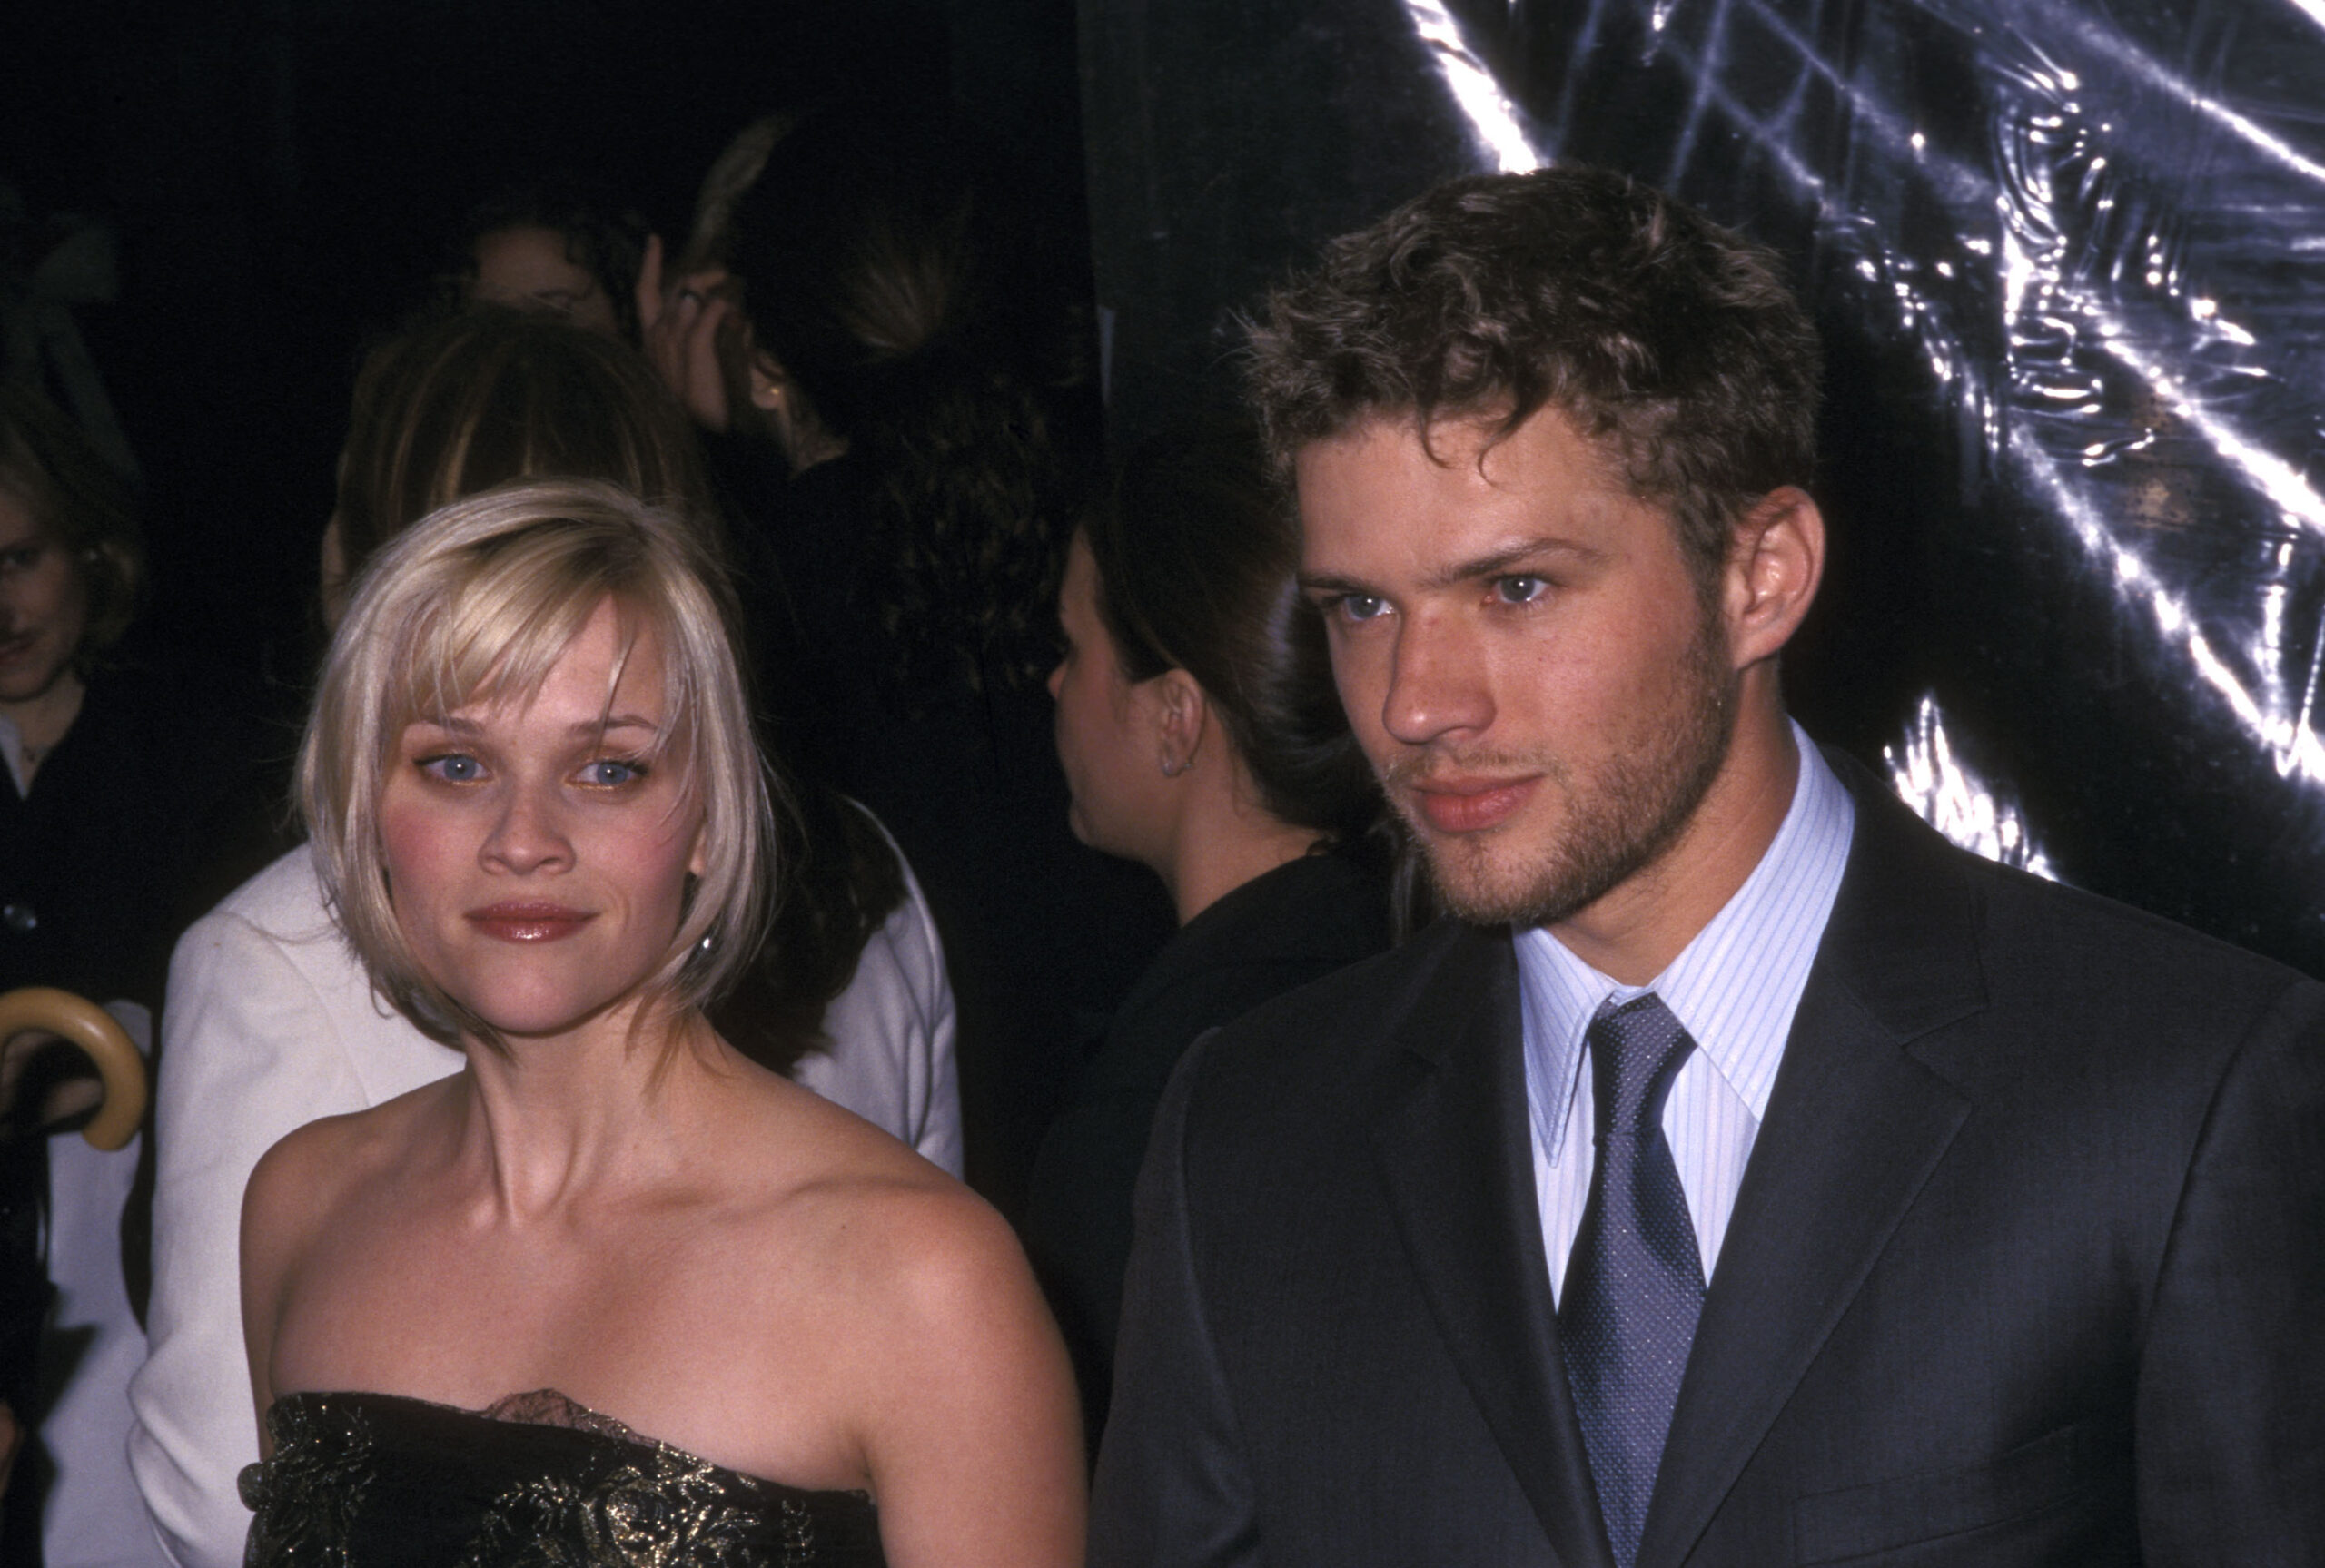 Reese Witherspoon opens up about her former marriage to Ryan Phillippe